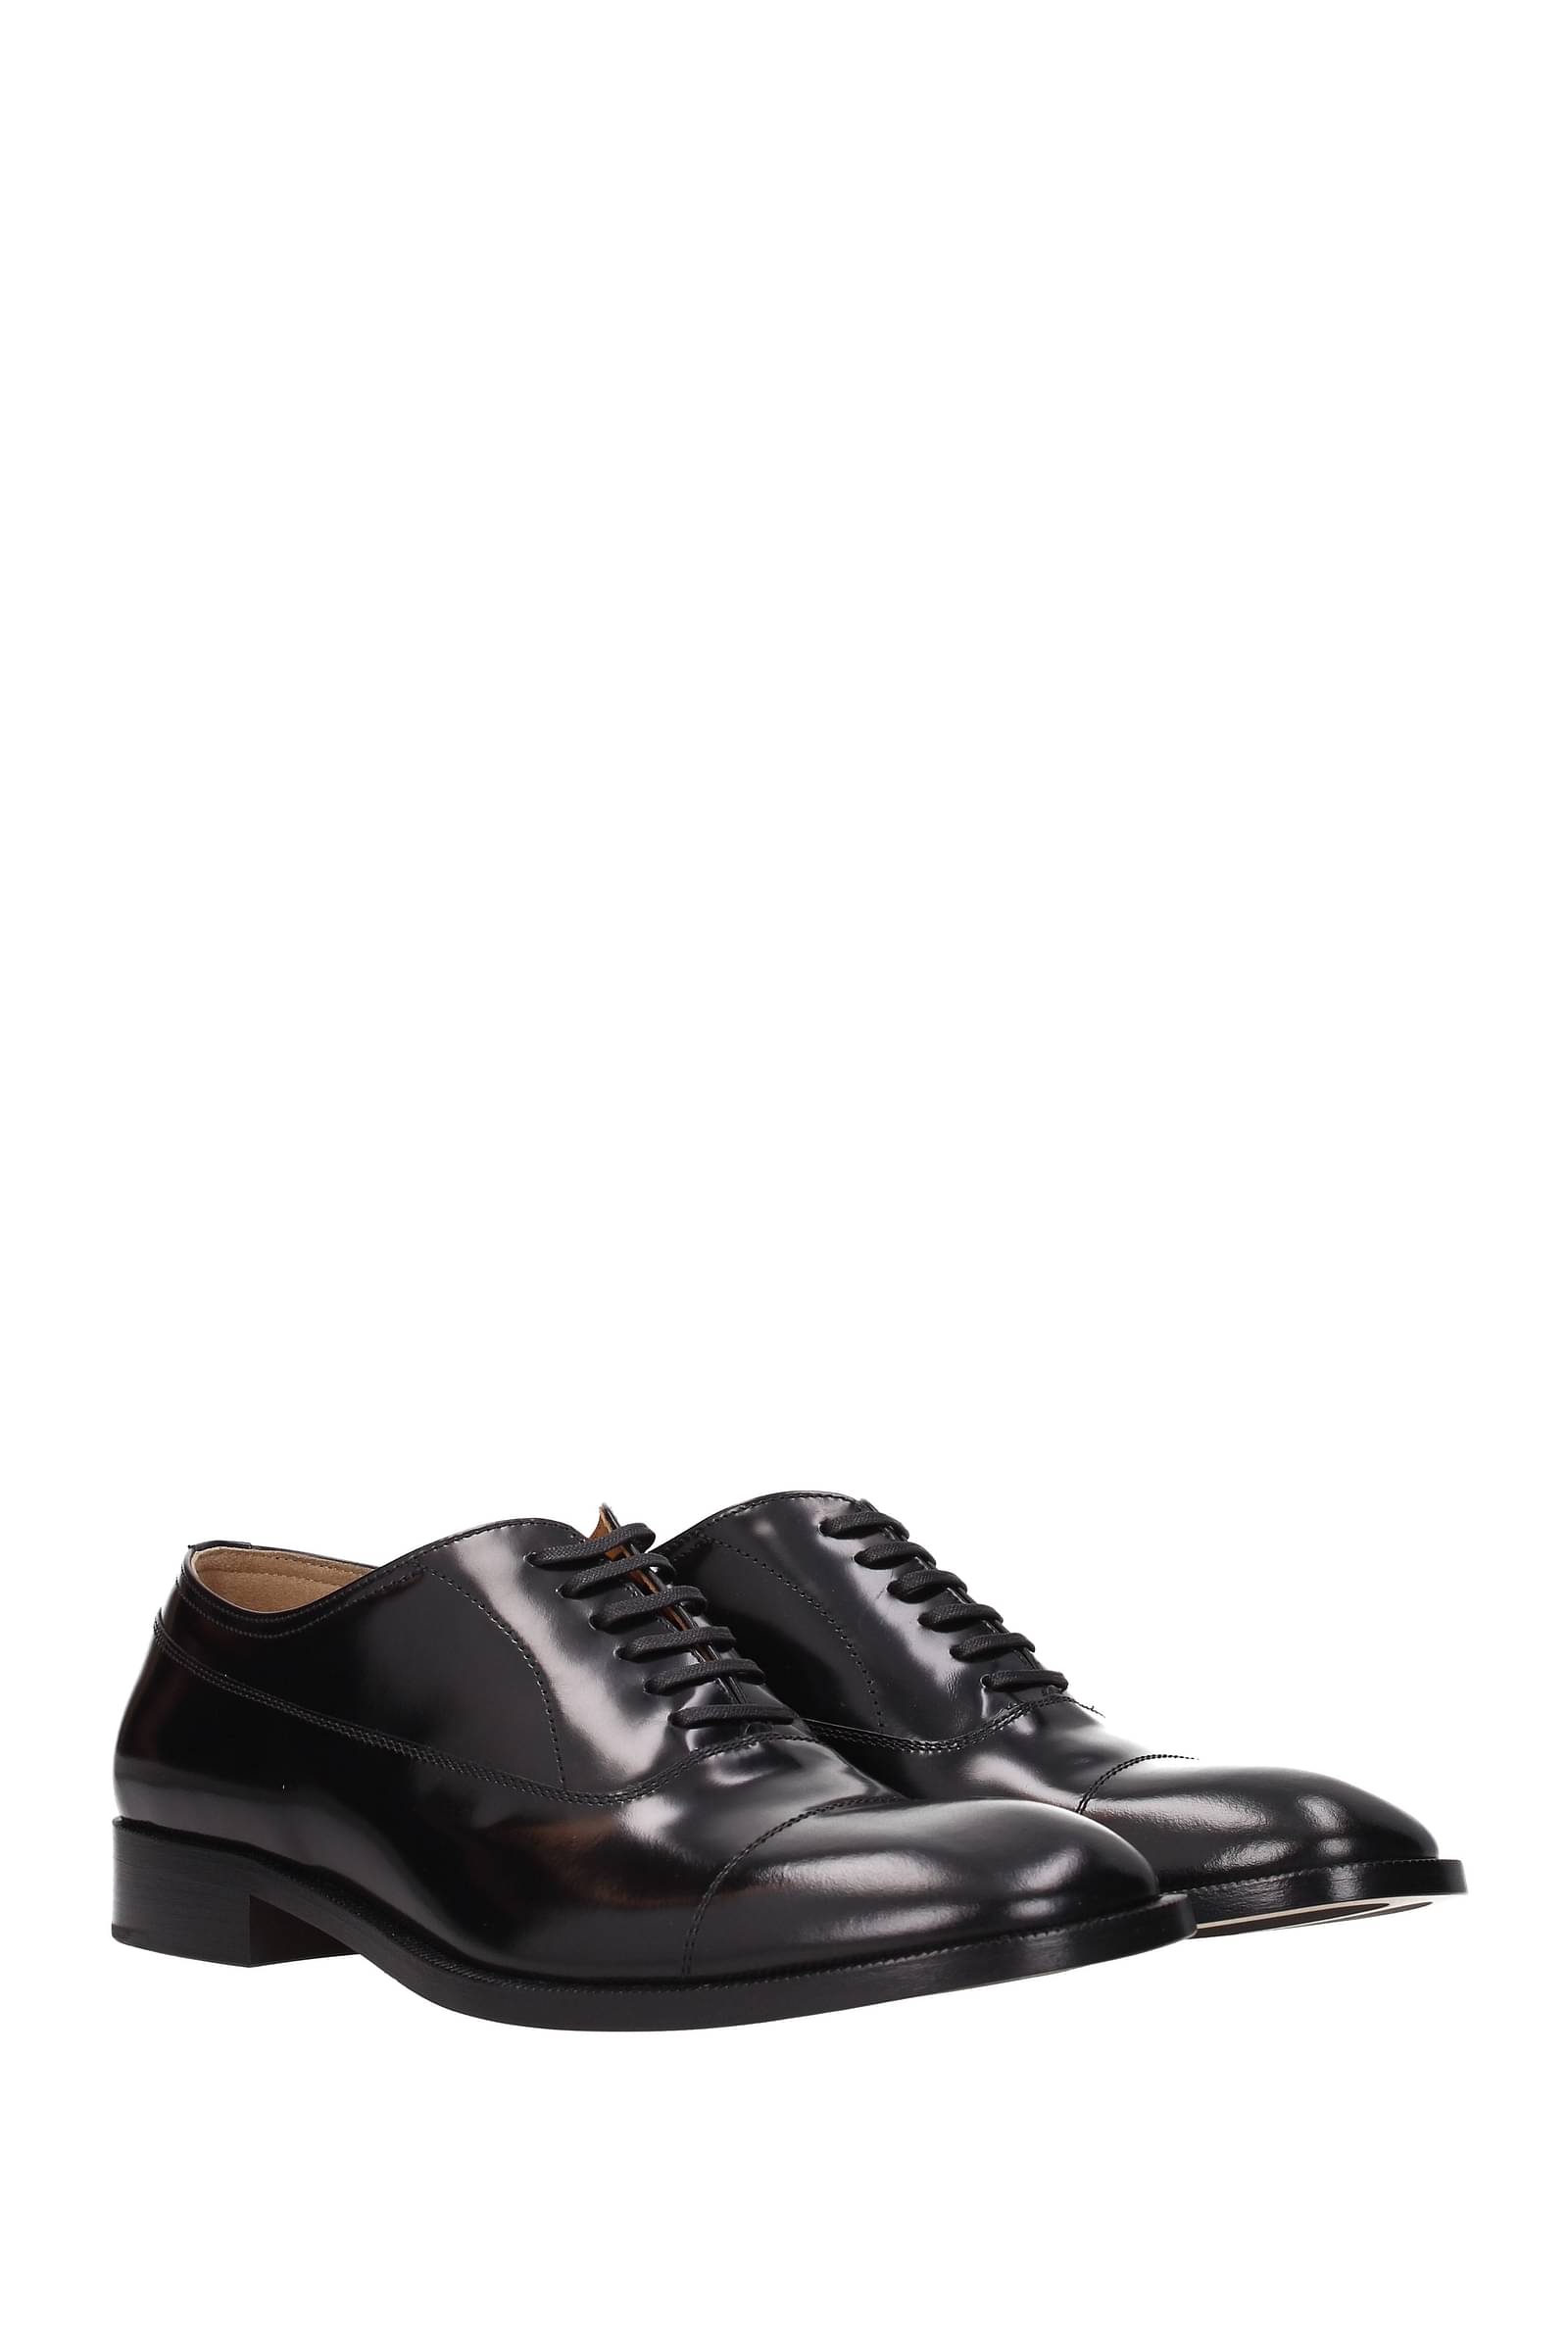 Loake Mcqueen Black Polished Leather Smart Lace Up Shoes 